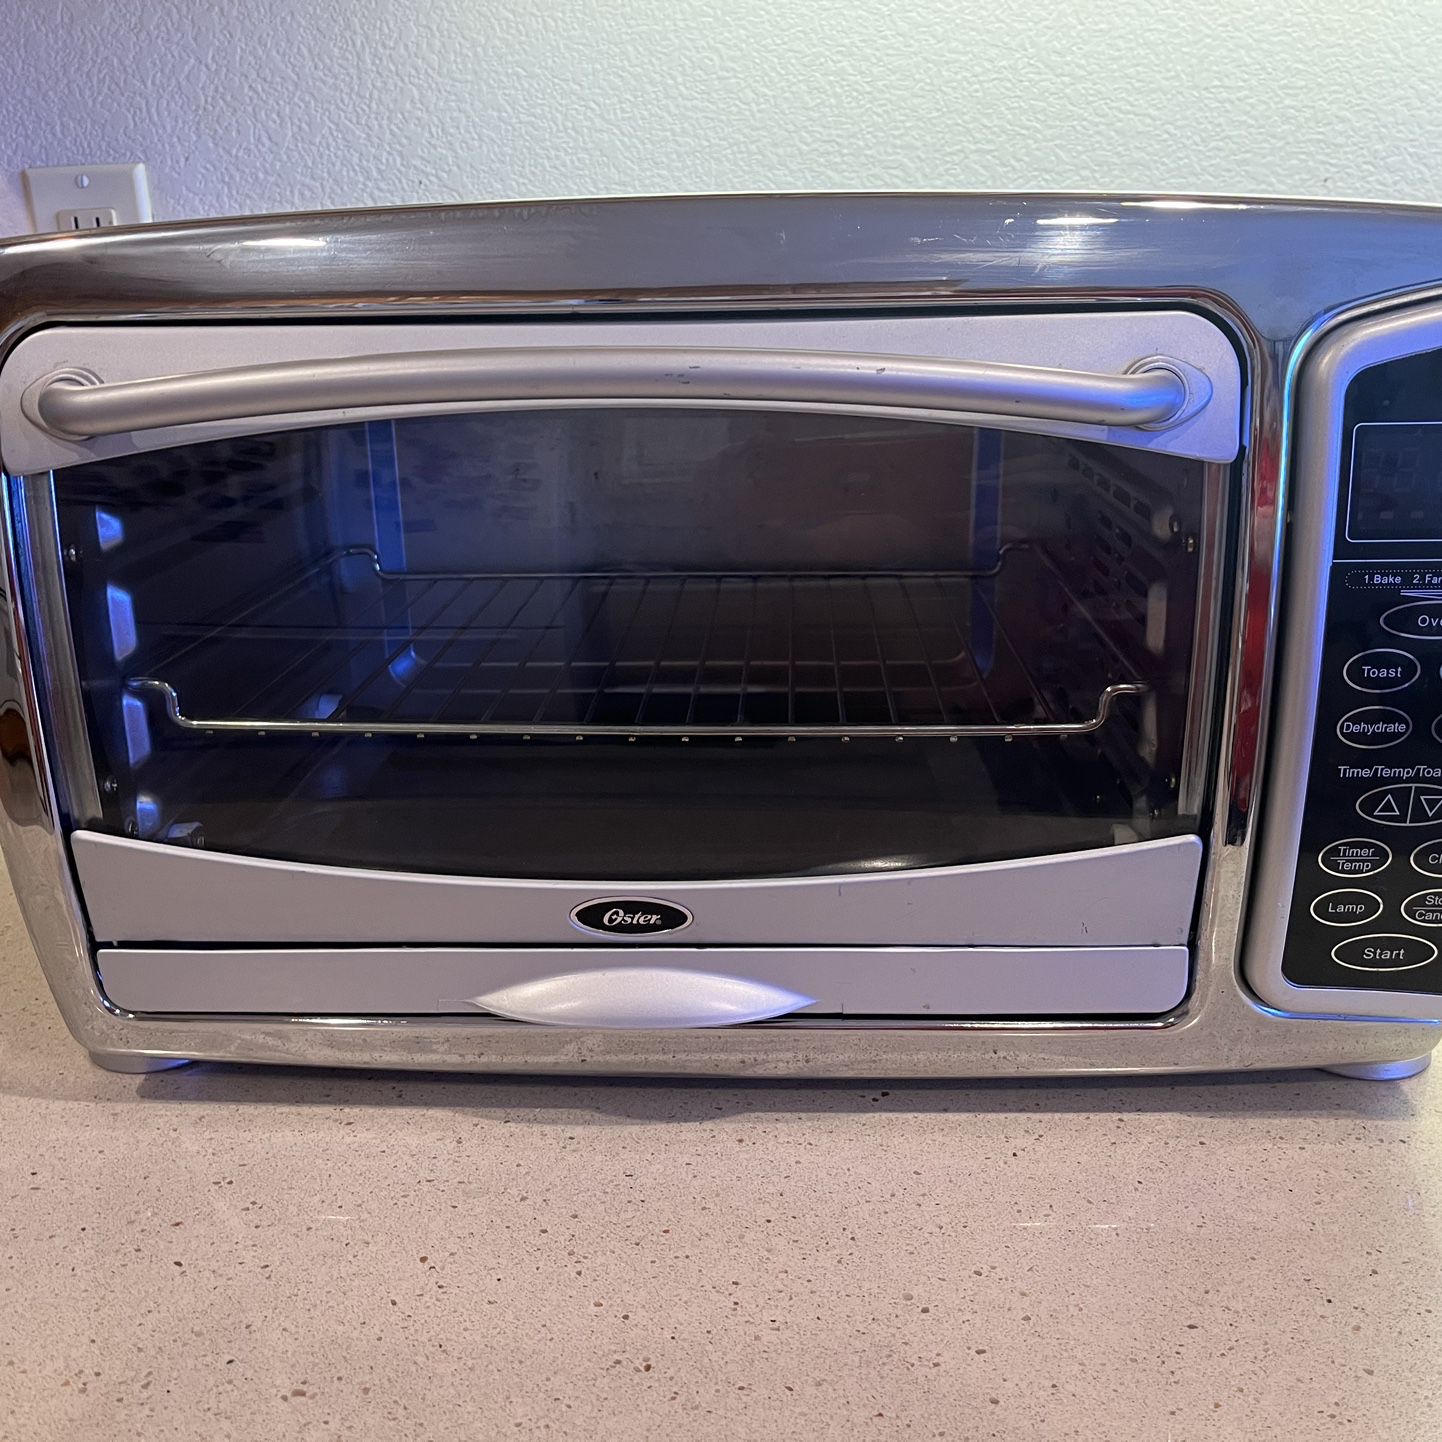 black and decker extra-wide toaster Oven model T03240xsBD for Sale in San  Diego, CA - OfferUp